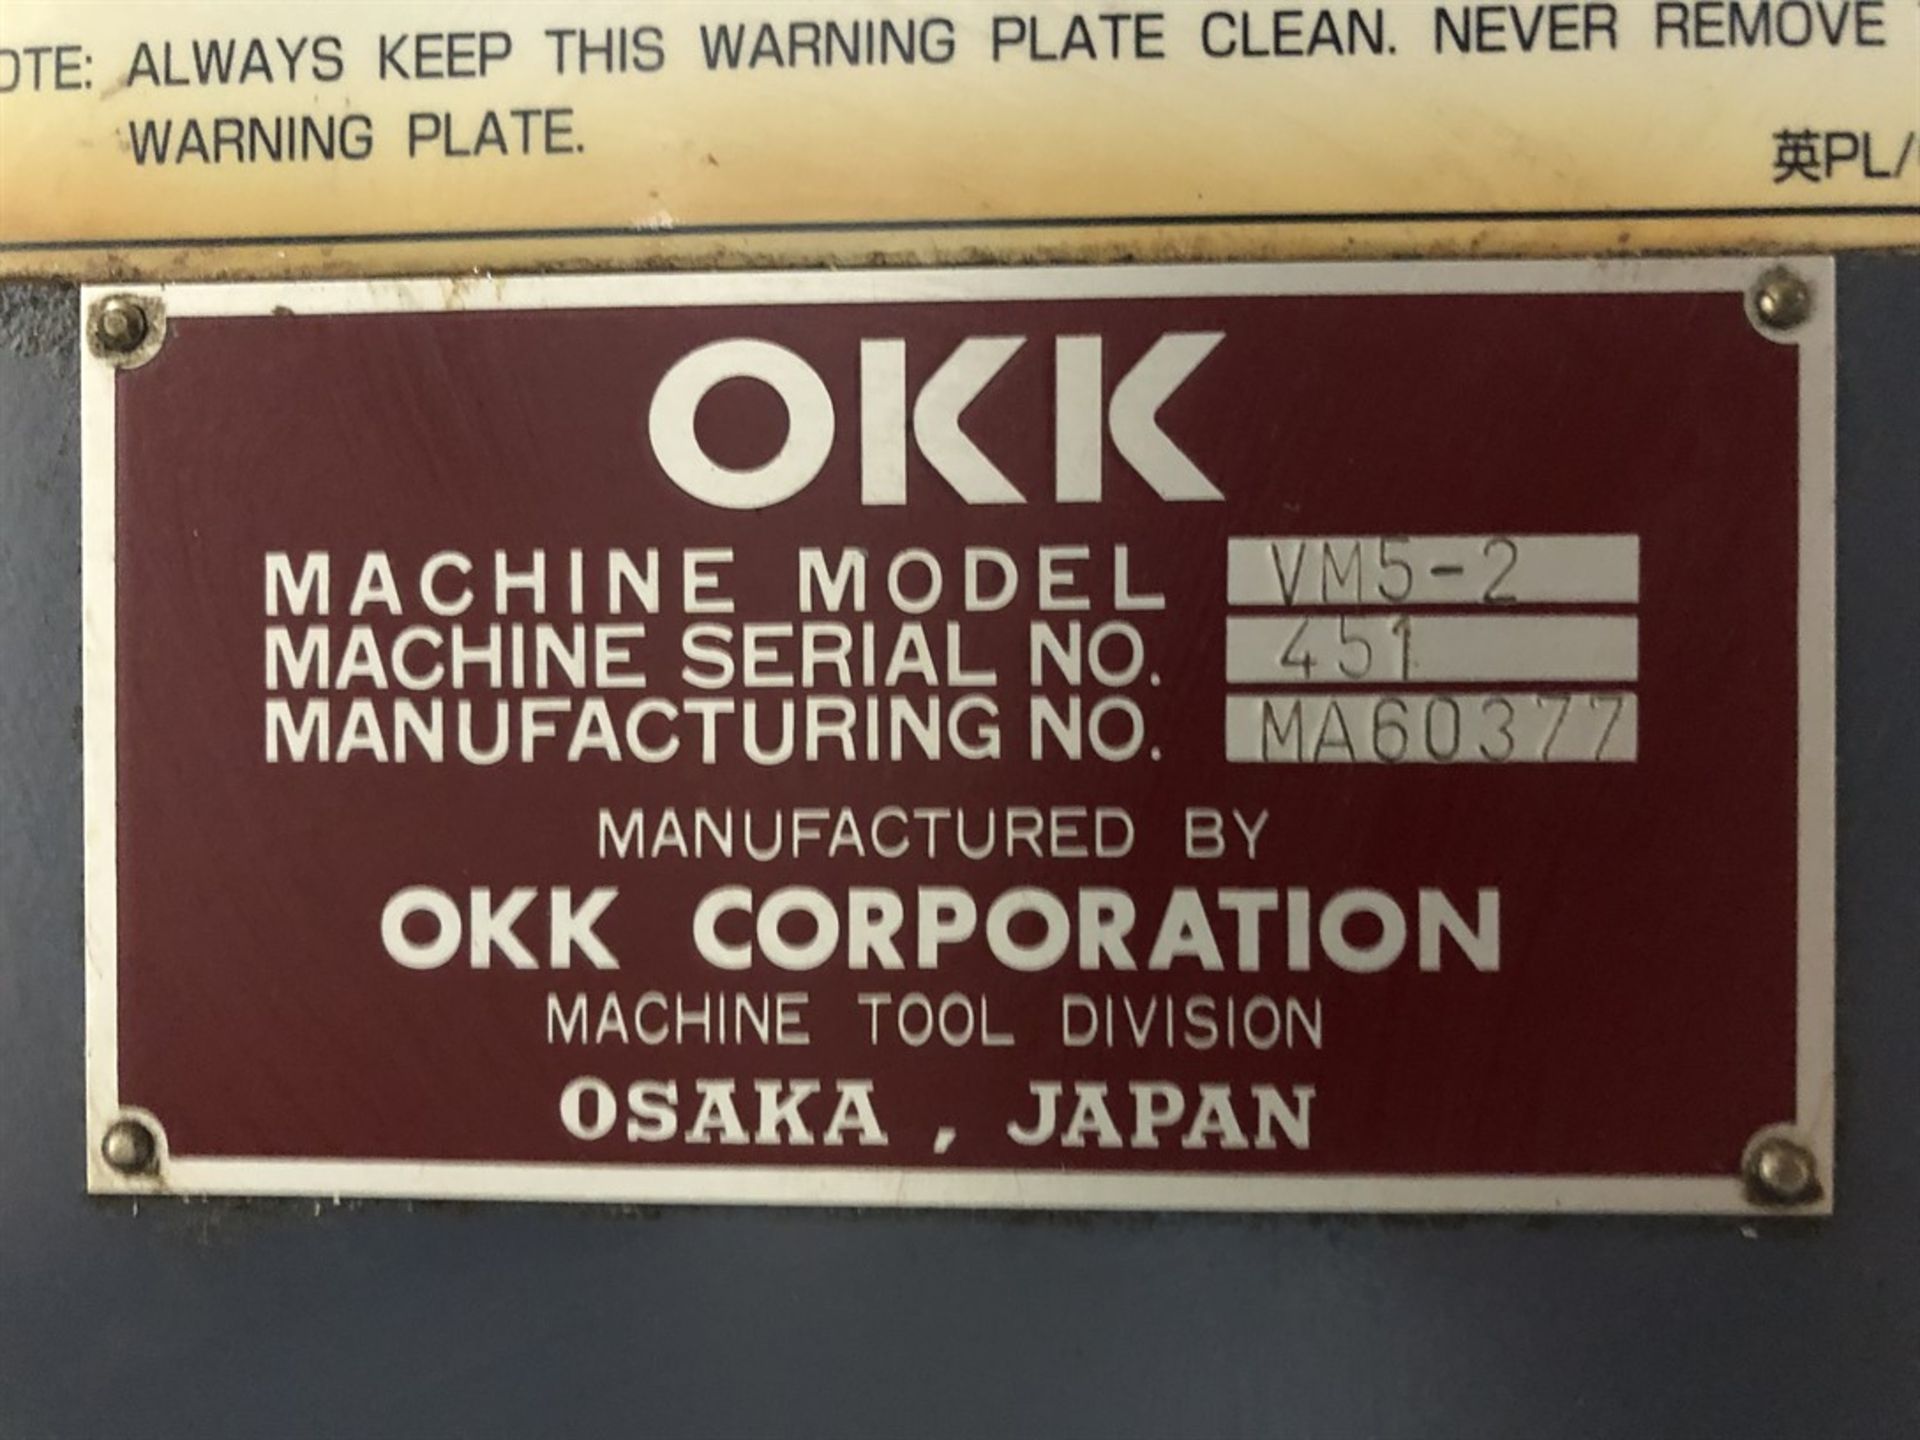 OKK VM5II Vertical Machining Center, s/n, 451, Neomatic 635 Control, 22” x 41” Table, CT40 Spindle - Image 10 of 10